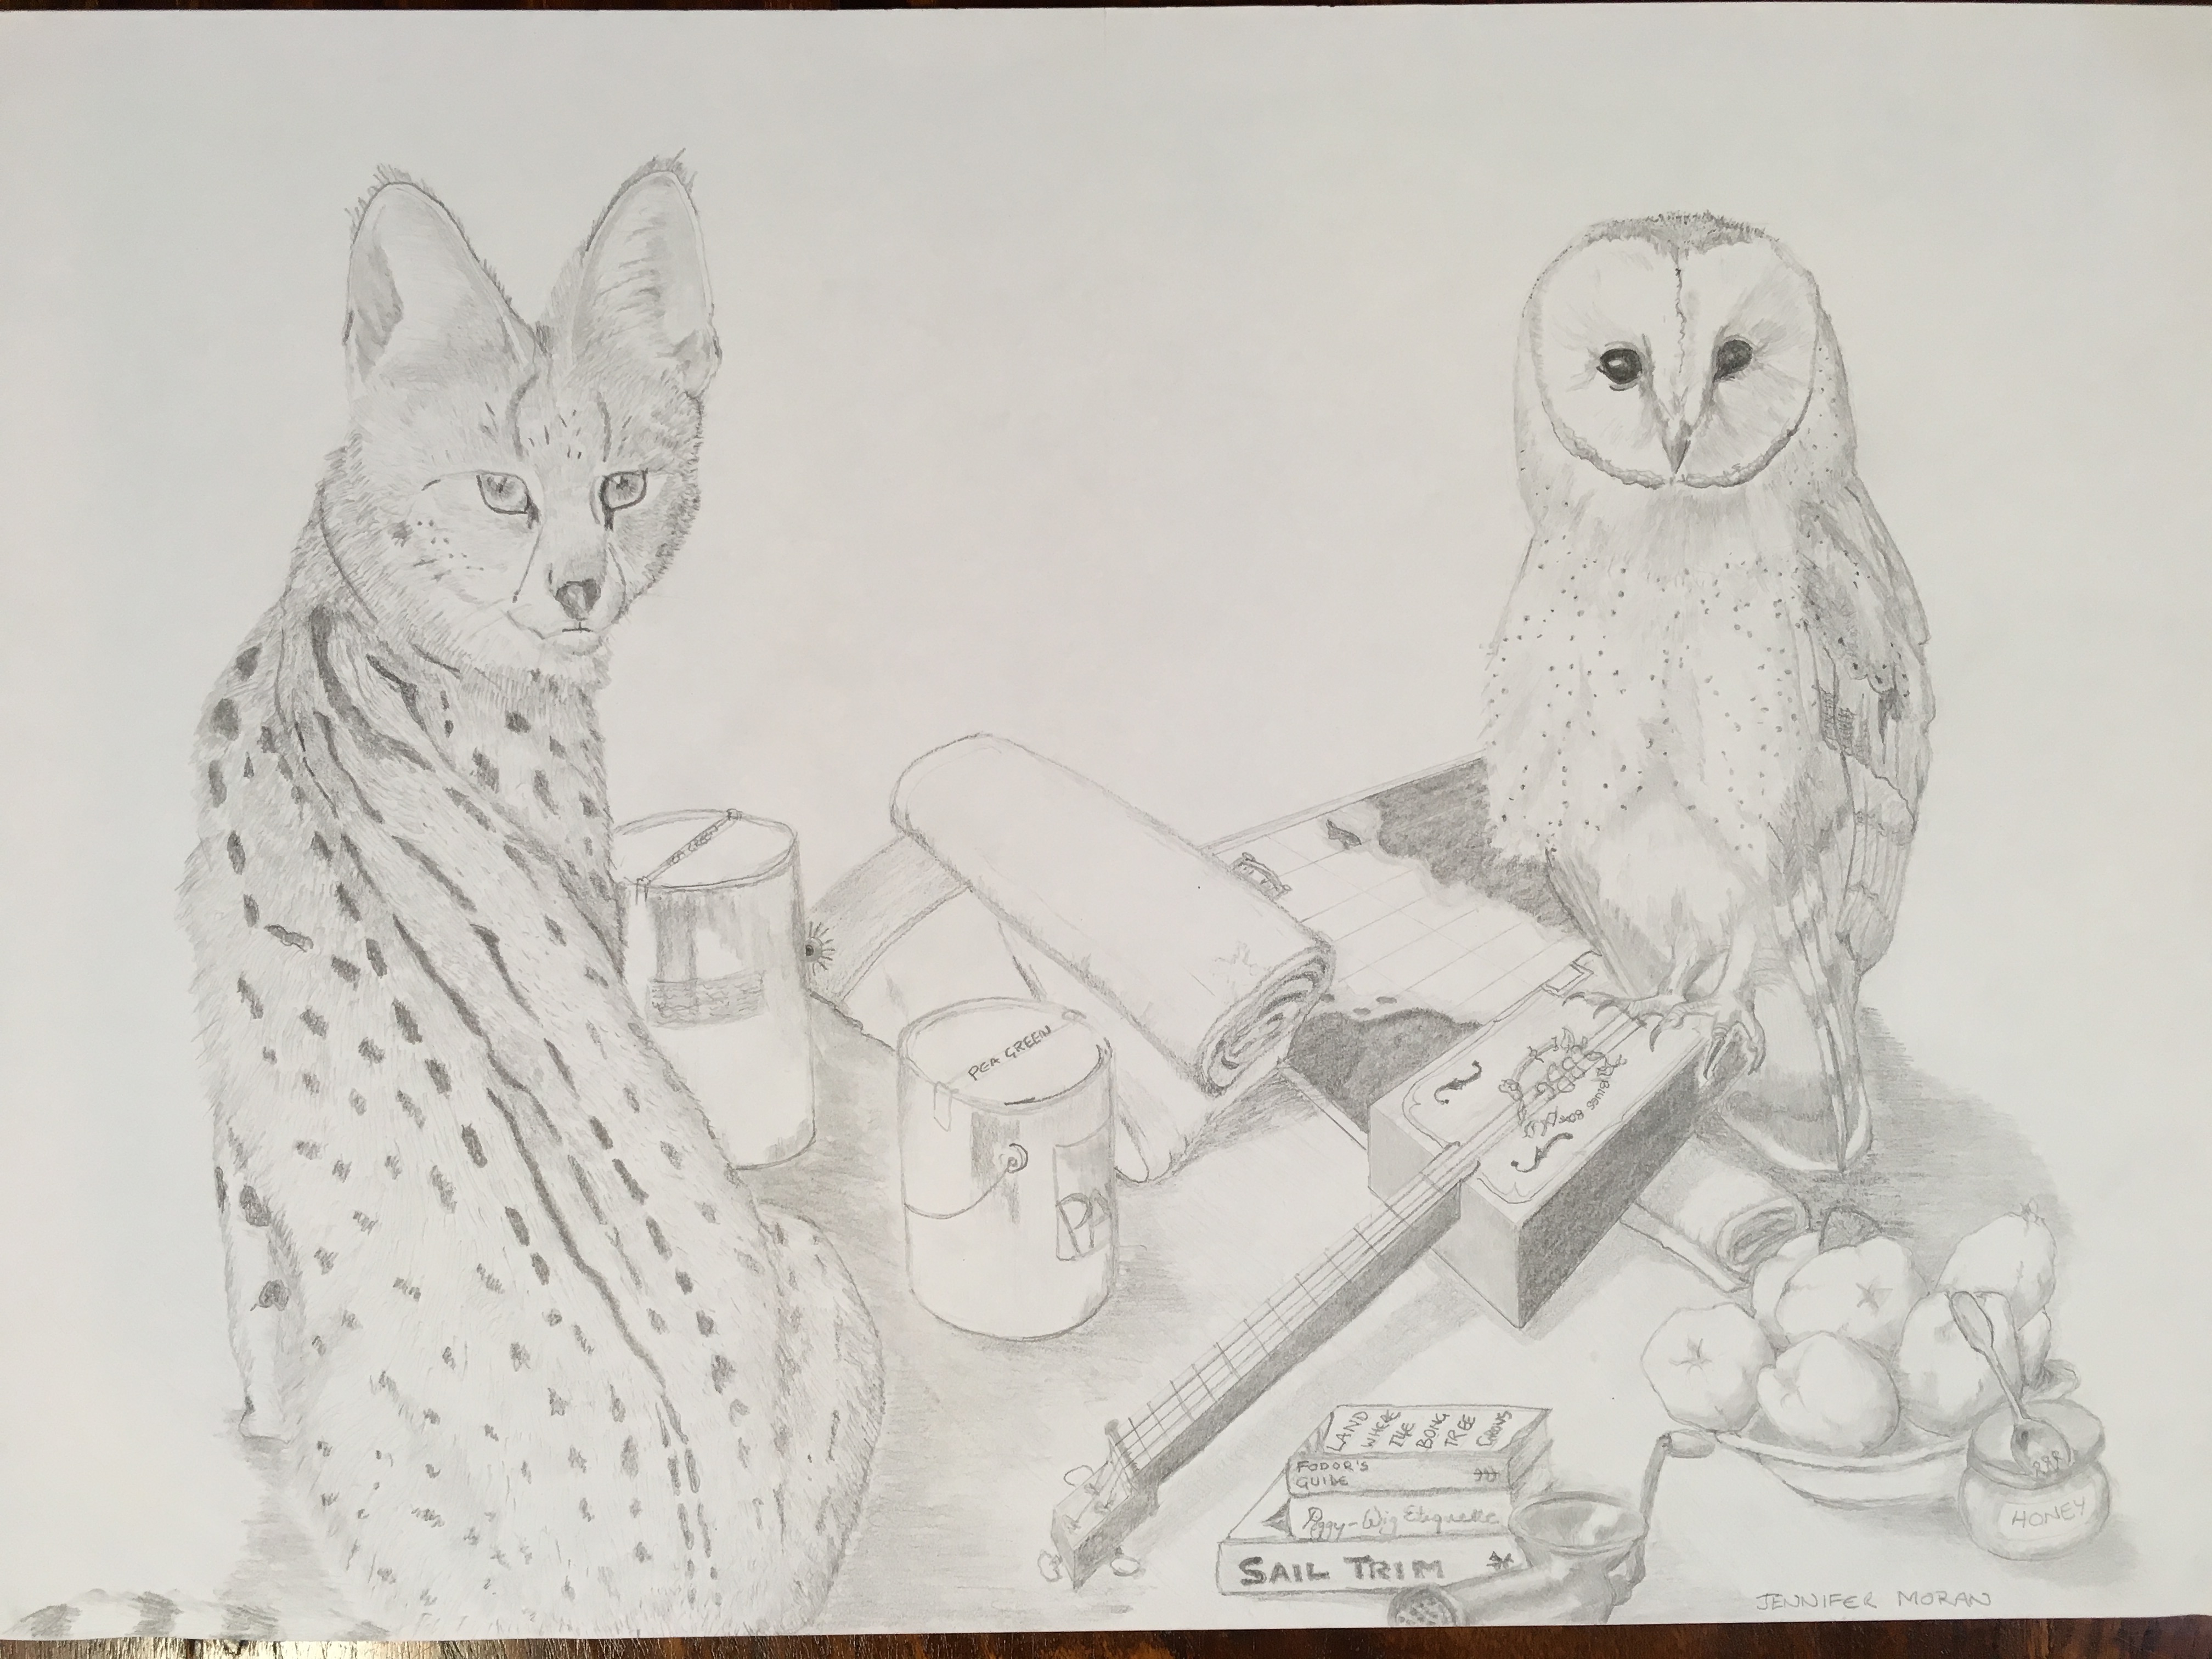 The Owl and the Pussy-cat